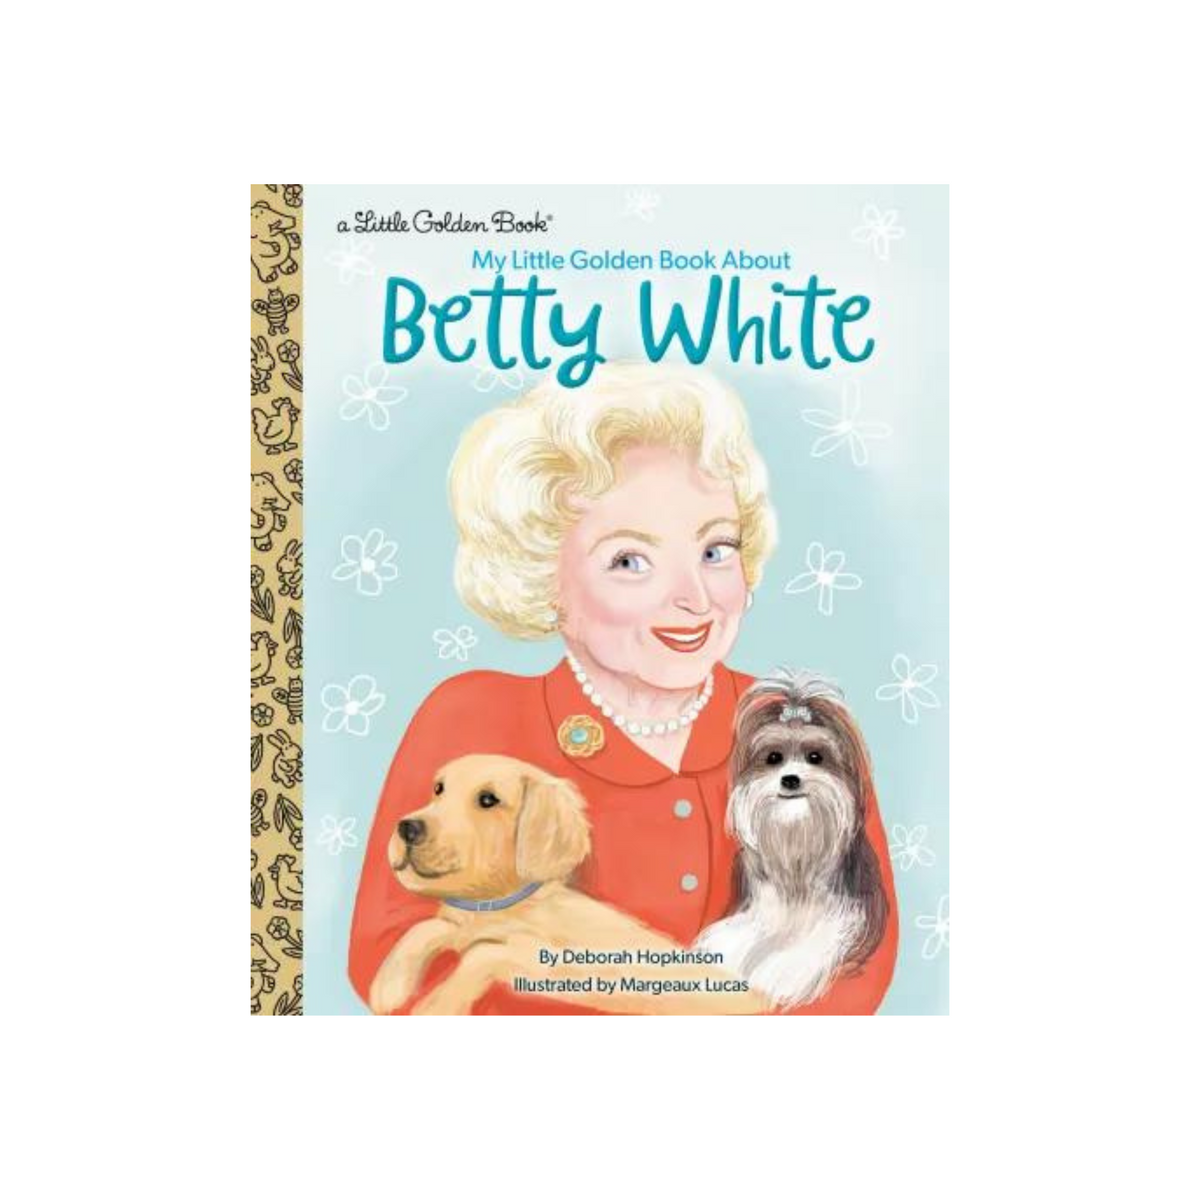 My Little Golden Book About Betty White